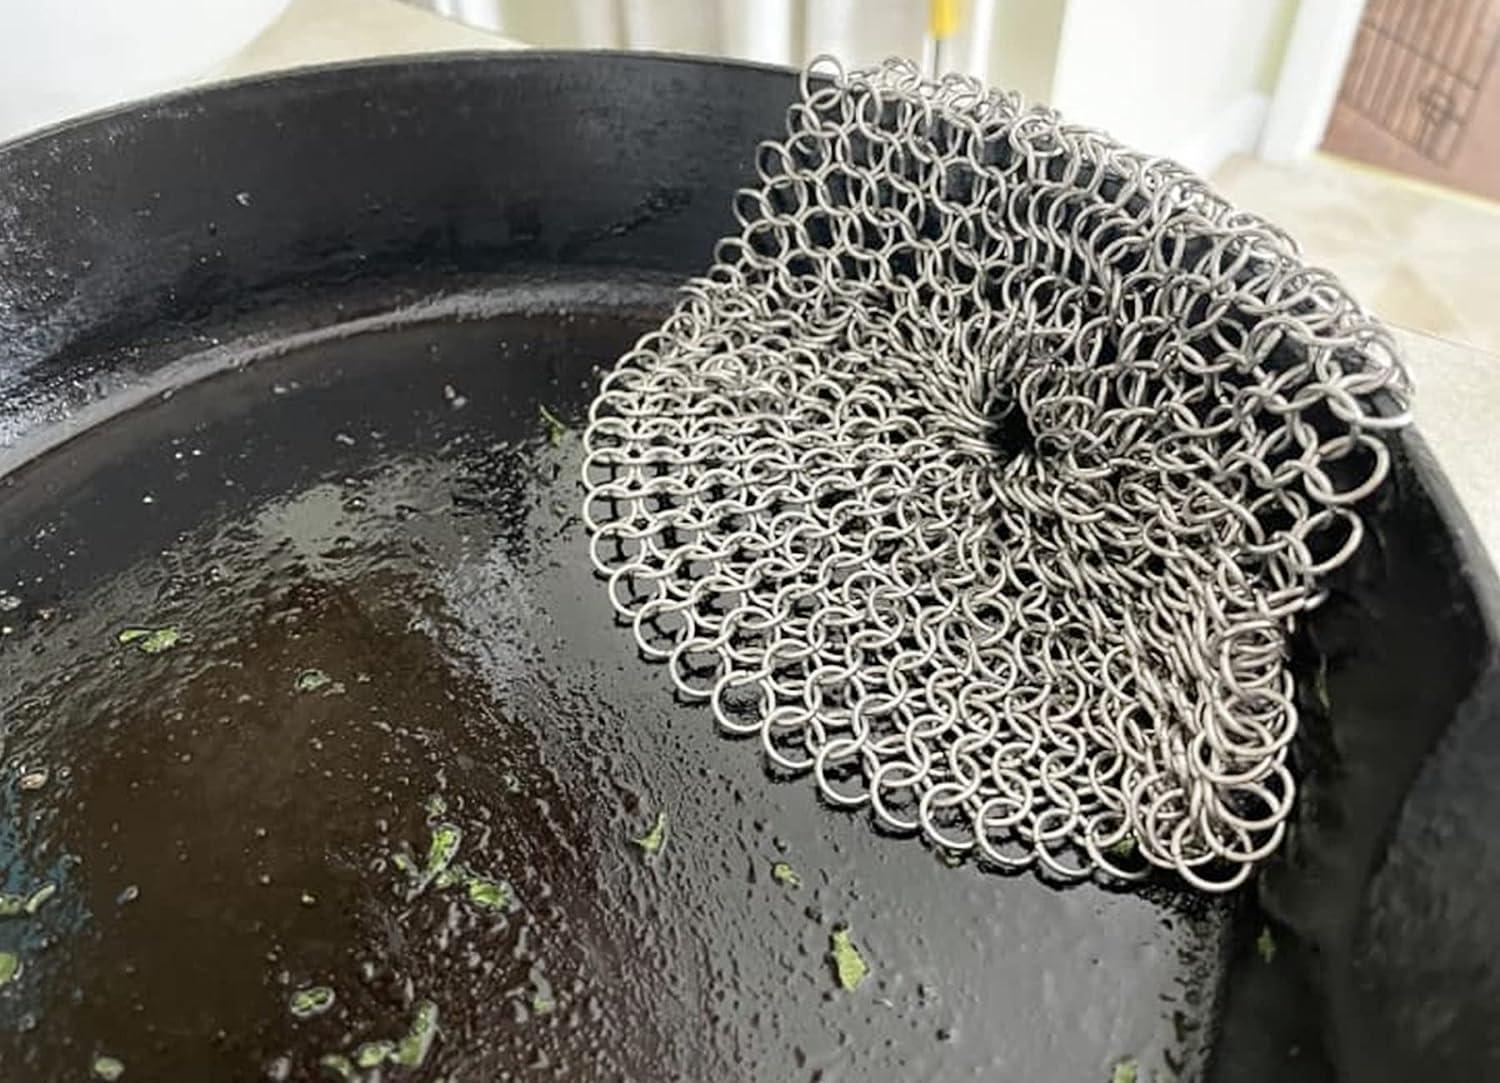 Stainless Steel Cast Iron Skillet Cleaner Chainmail Cleaning Scrubber With  Hanging Ring for Cast Iron Pan,Pre-Seasoned Pan,Griddle Pans, BBQ Grills  and More Pot Cookware-Square 7x7 Inch 